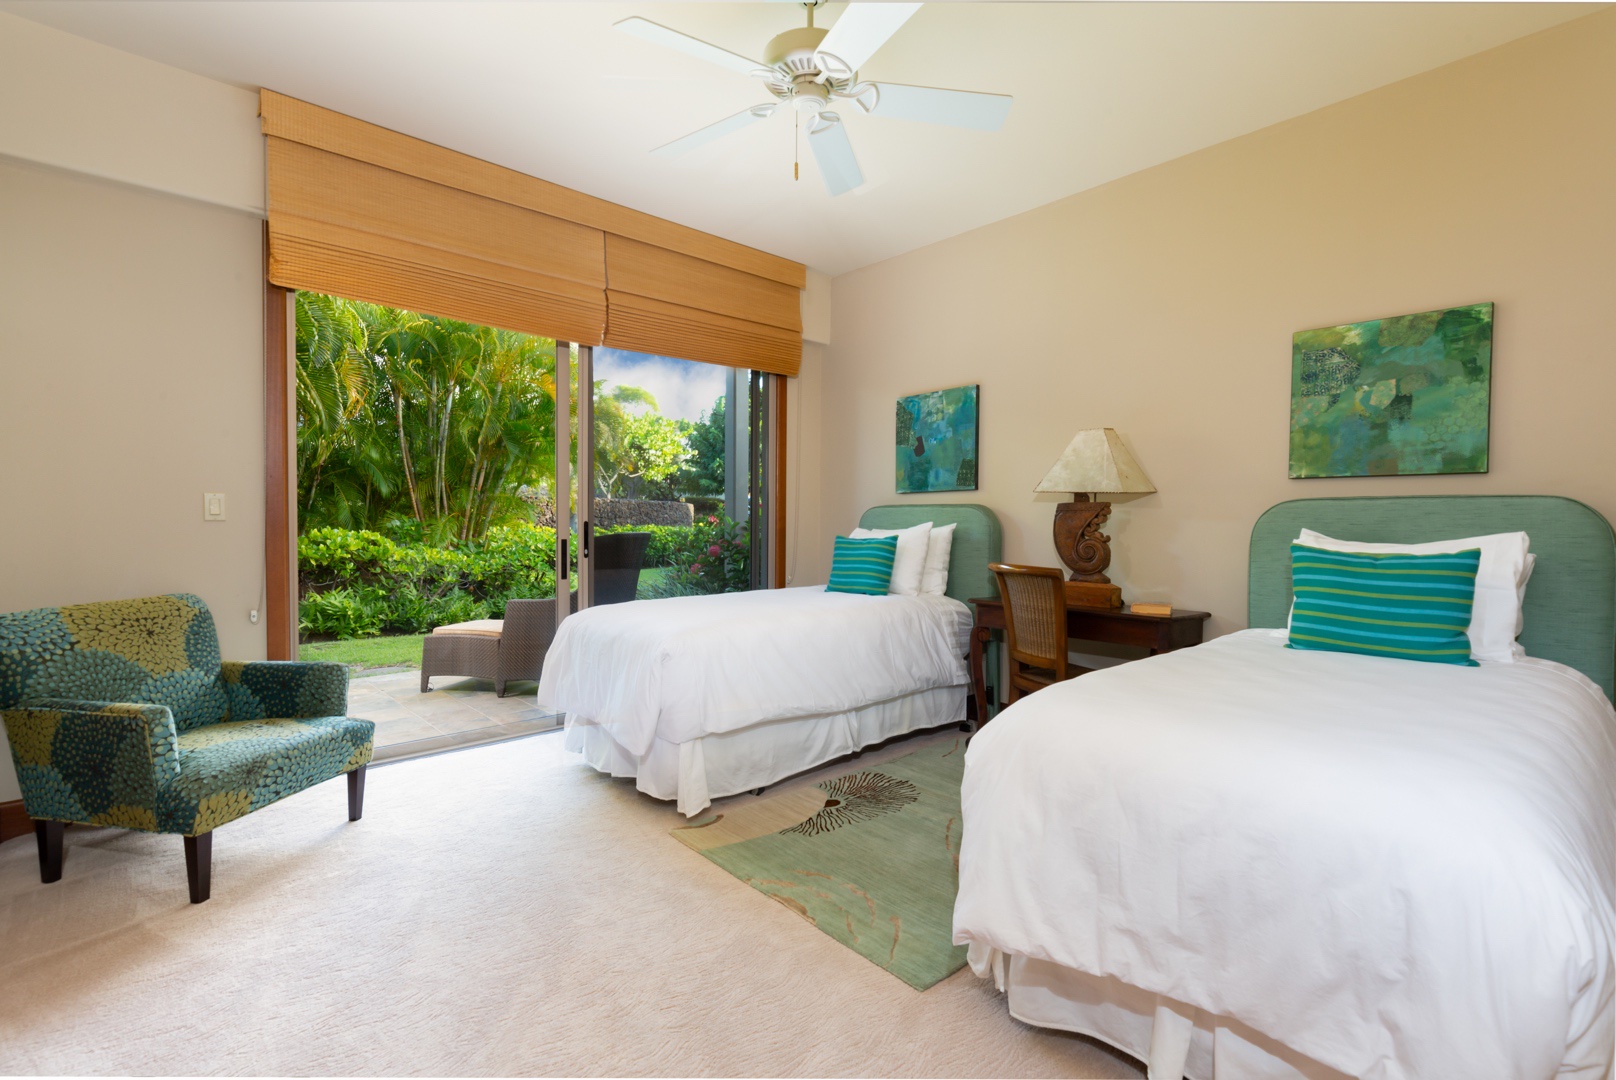 Kailua Kona Vacation Rentals, 3BD Ke Alaula Villa (210A) at Four Seasons Resort at Hualalai - Lower level guest room with two twin beds (can convert to a king upon request) and private patio.